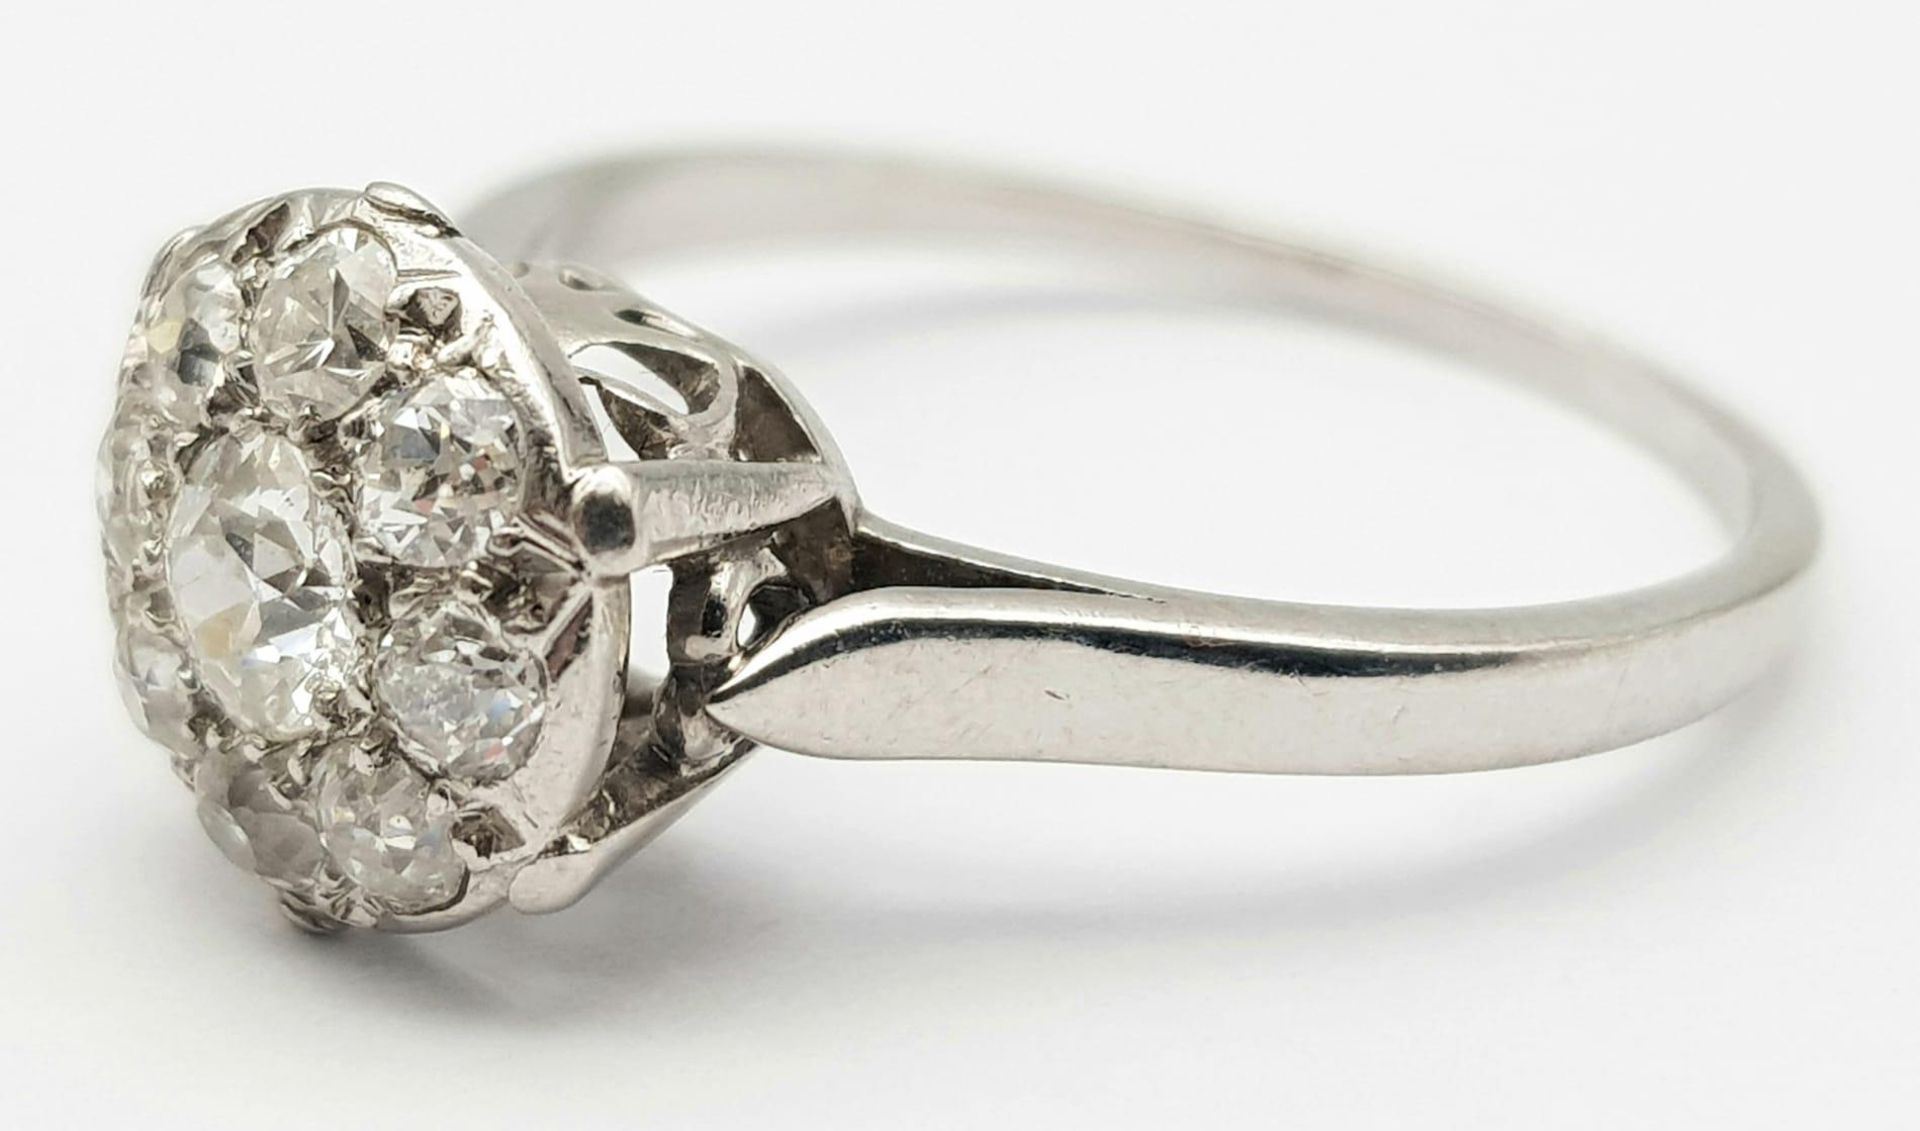 A LOVELY PLATINUM VINTAGE DIAMOND RING WITH APPROX 1.10CT OLD CUT DIAMONDS, WEIGHT 3.6G SIZE O - Image 6 of 9